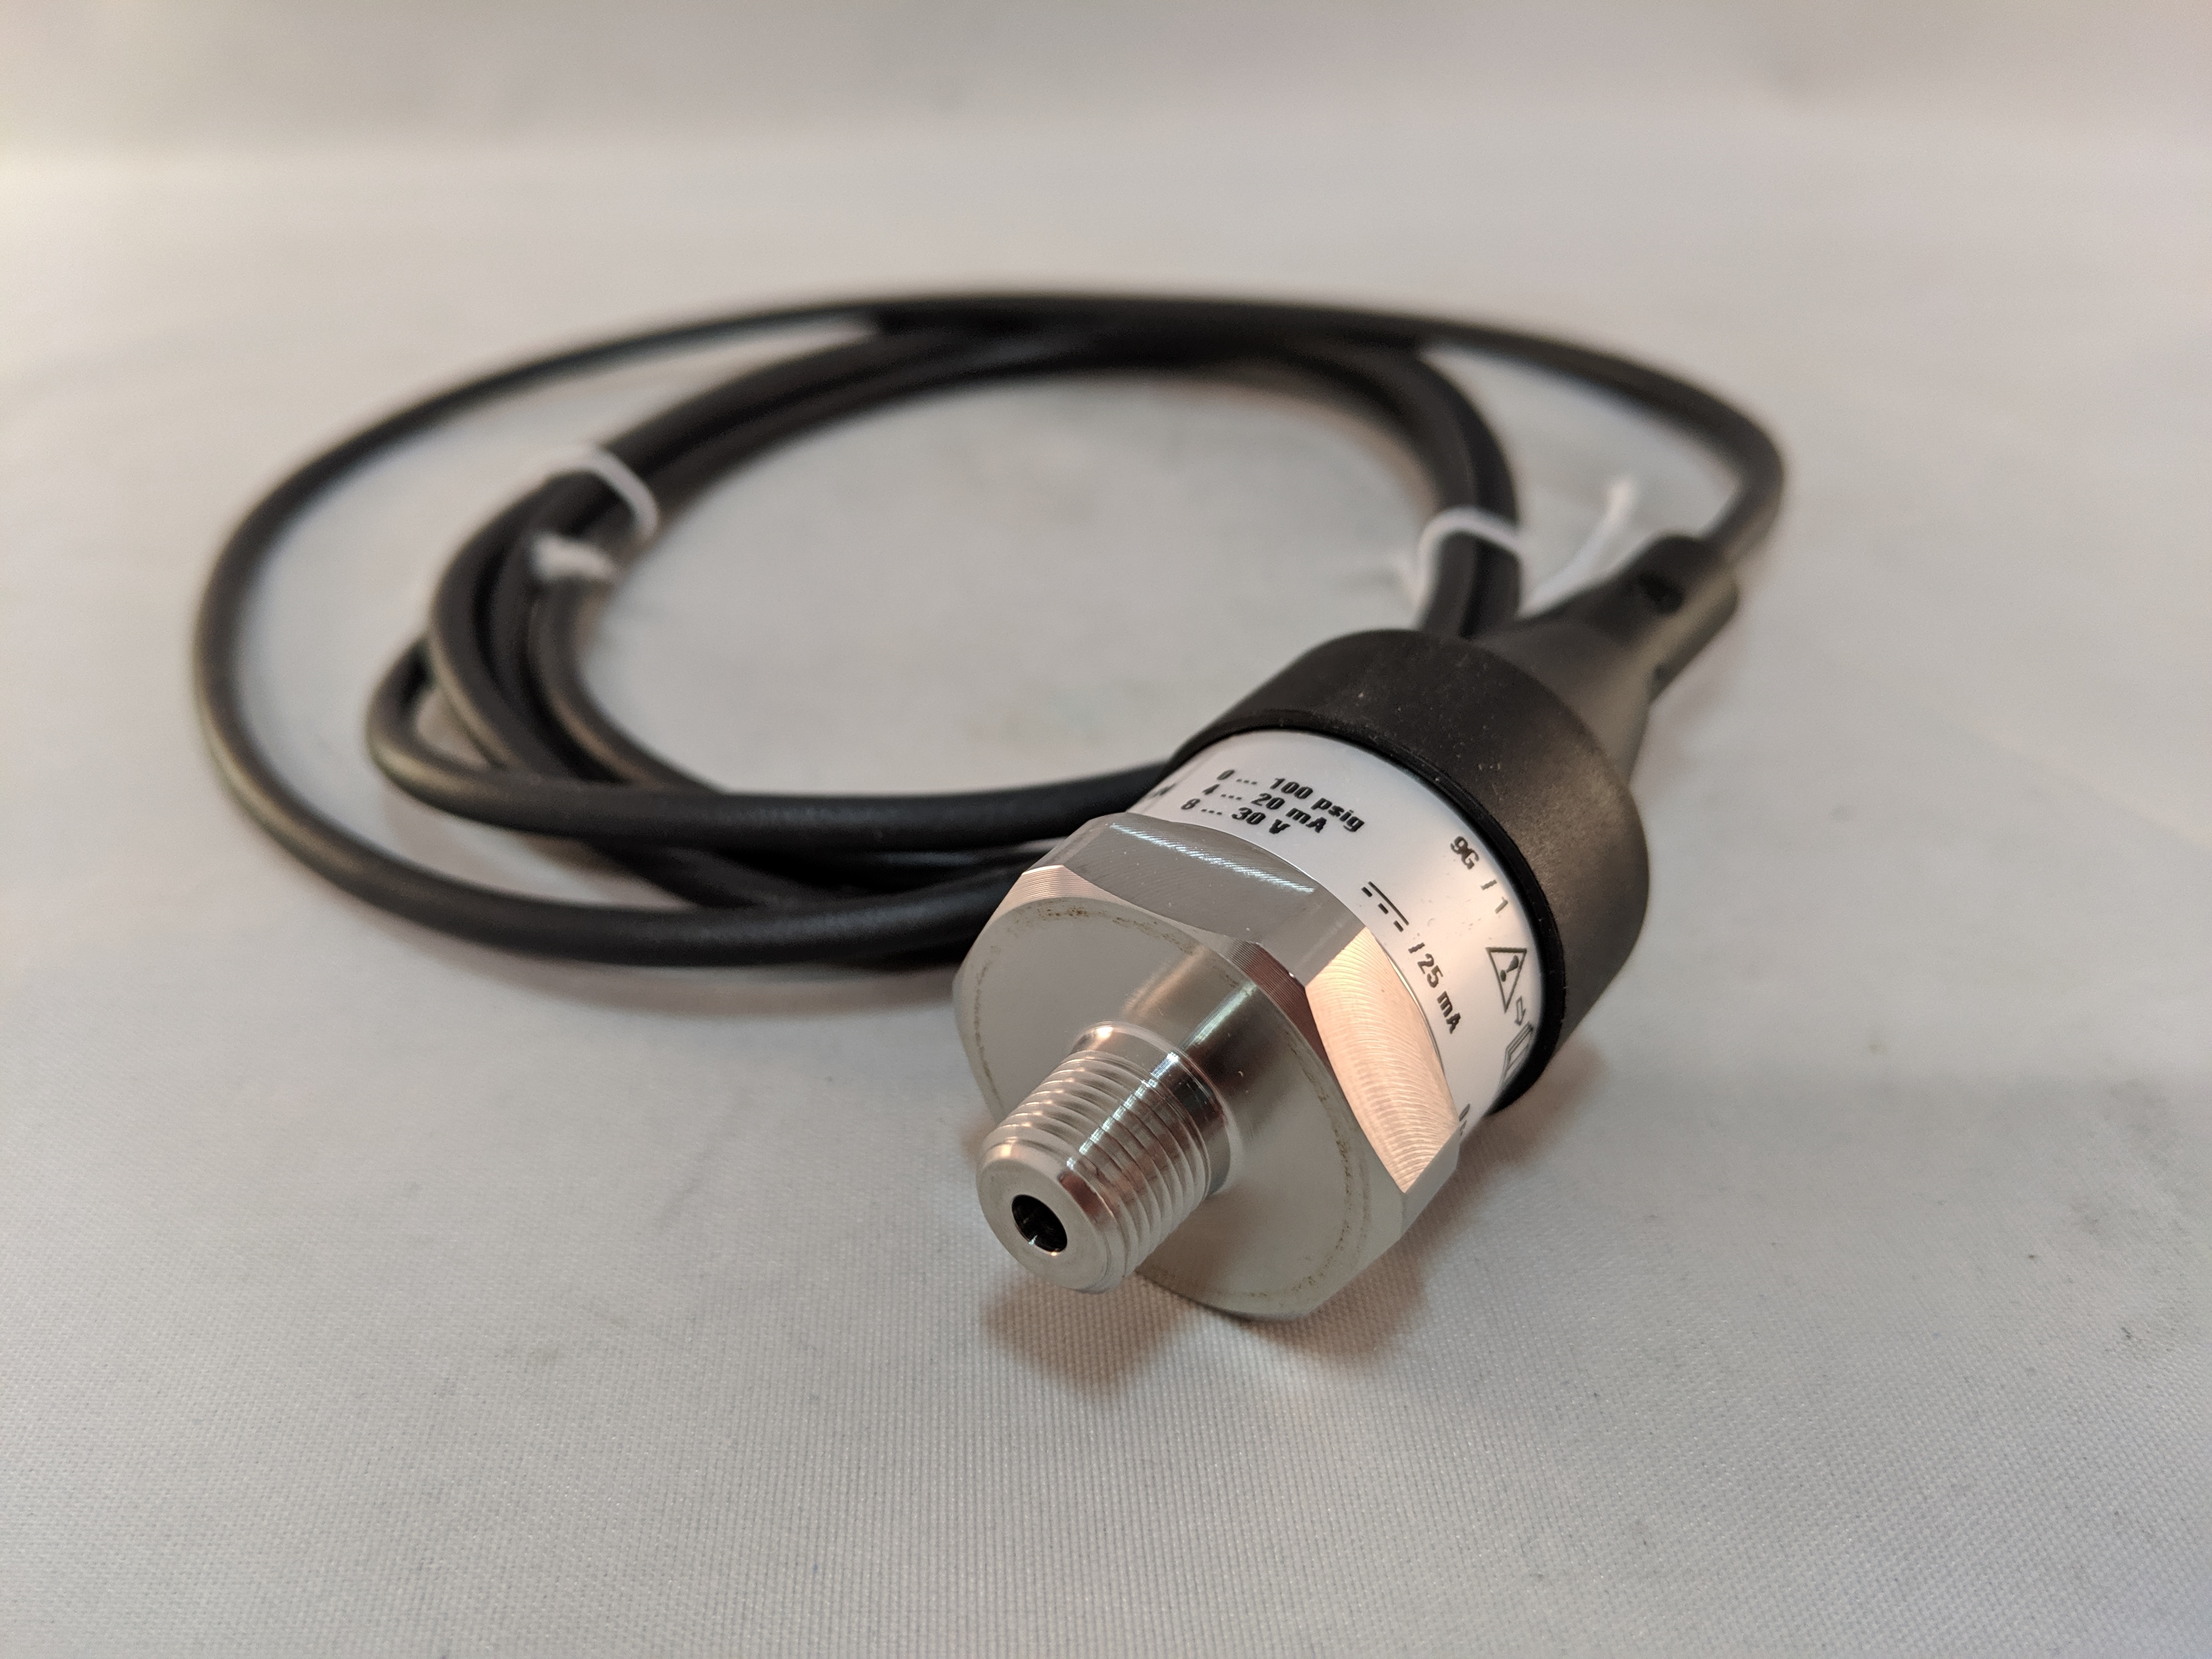 A-10 PRESSURE TRANSDUCER 100PSI 4-20MADC 1/8"NPT 6'CABLE 40B00100P4C0000 100.100.1127